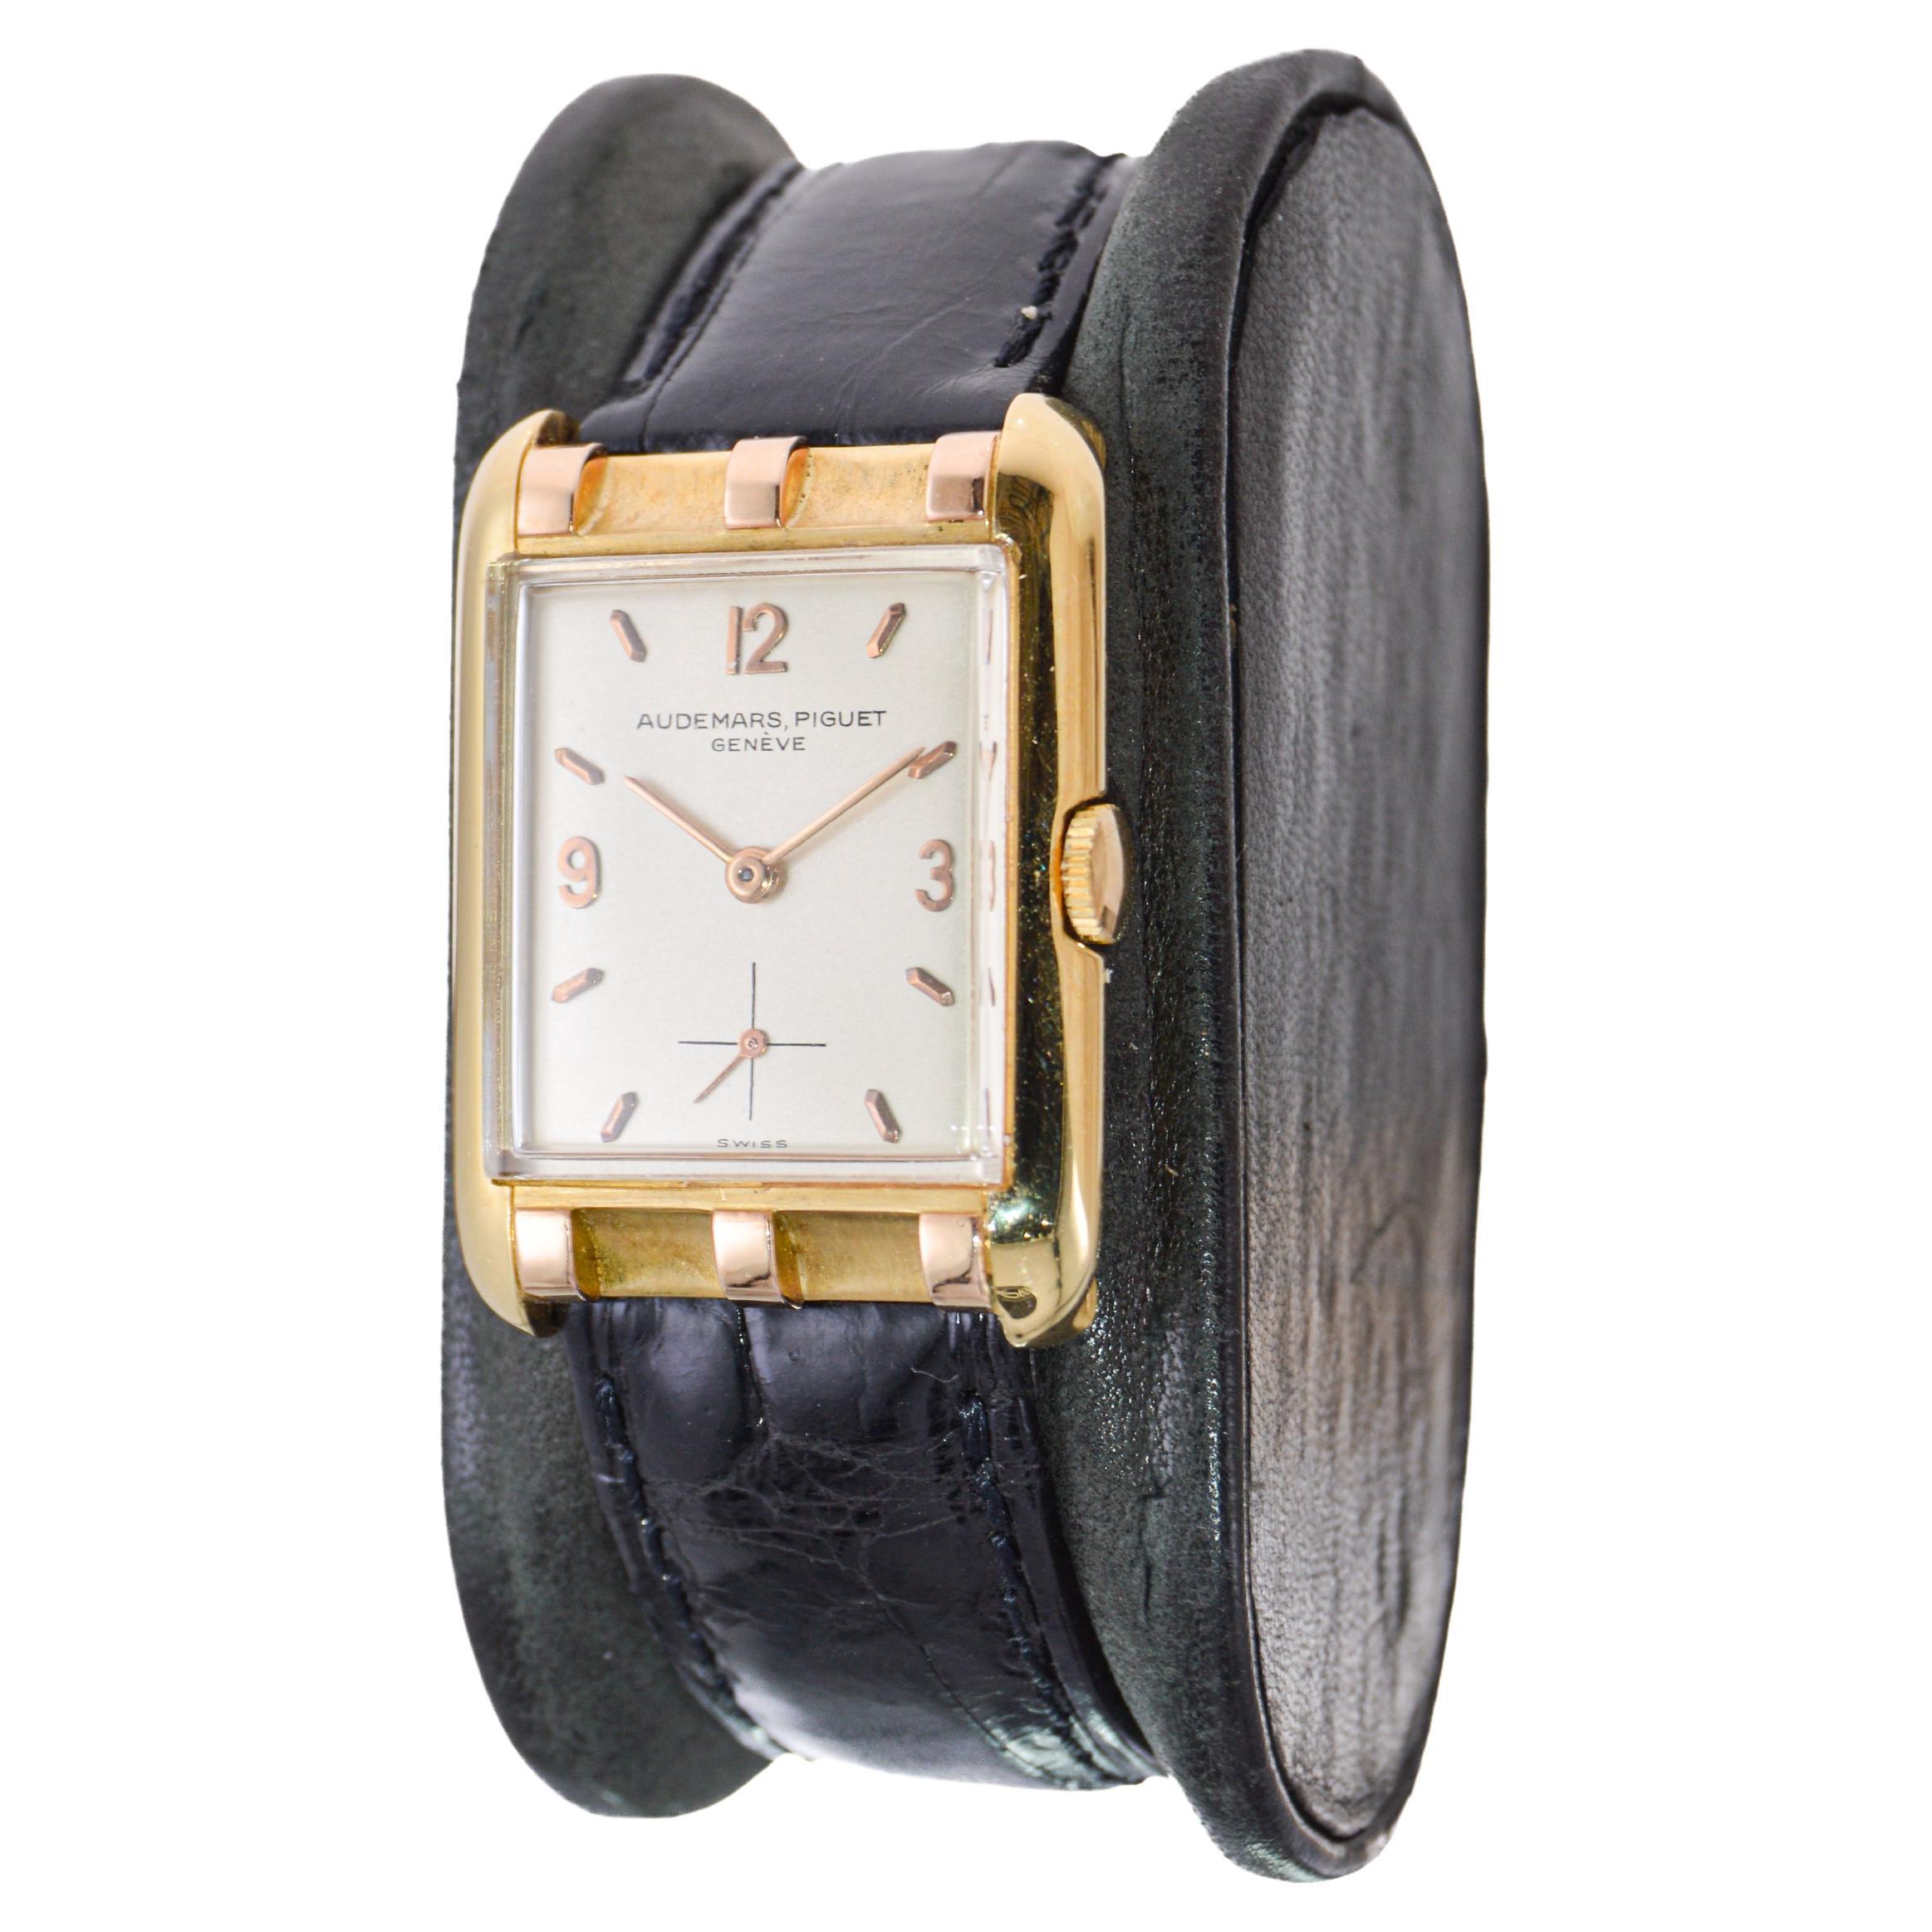 Audemars Piguet 18Kt. Yellow and Rose Gold Hand Made Art Deco Dress Watch 1940's In Excellent Condition For Sale In Long Beach, CA